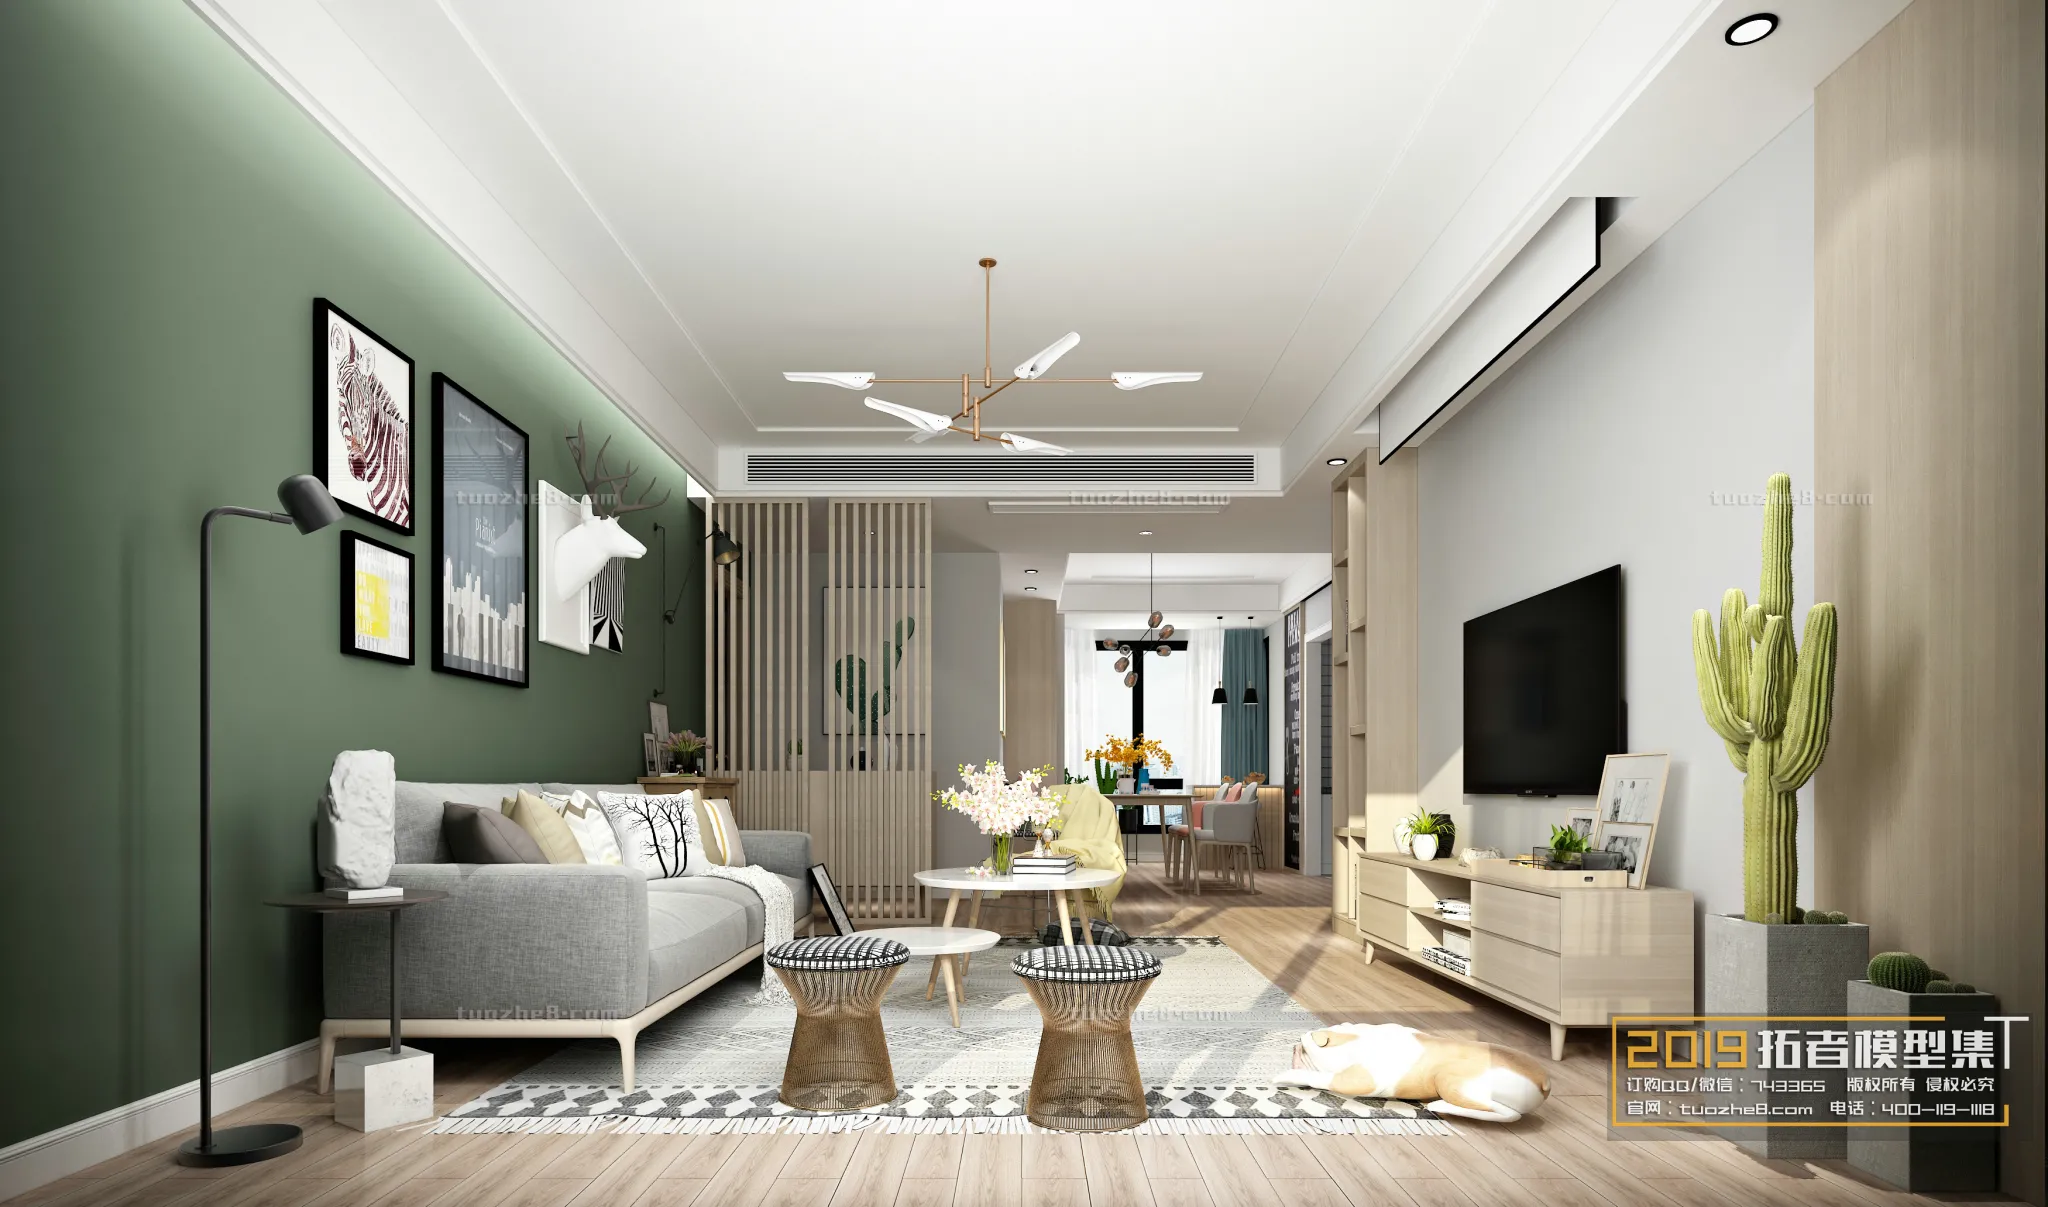 Extension Interior – LINGVING ROOM – NORDIC STYLES – 008